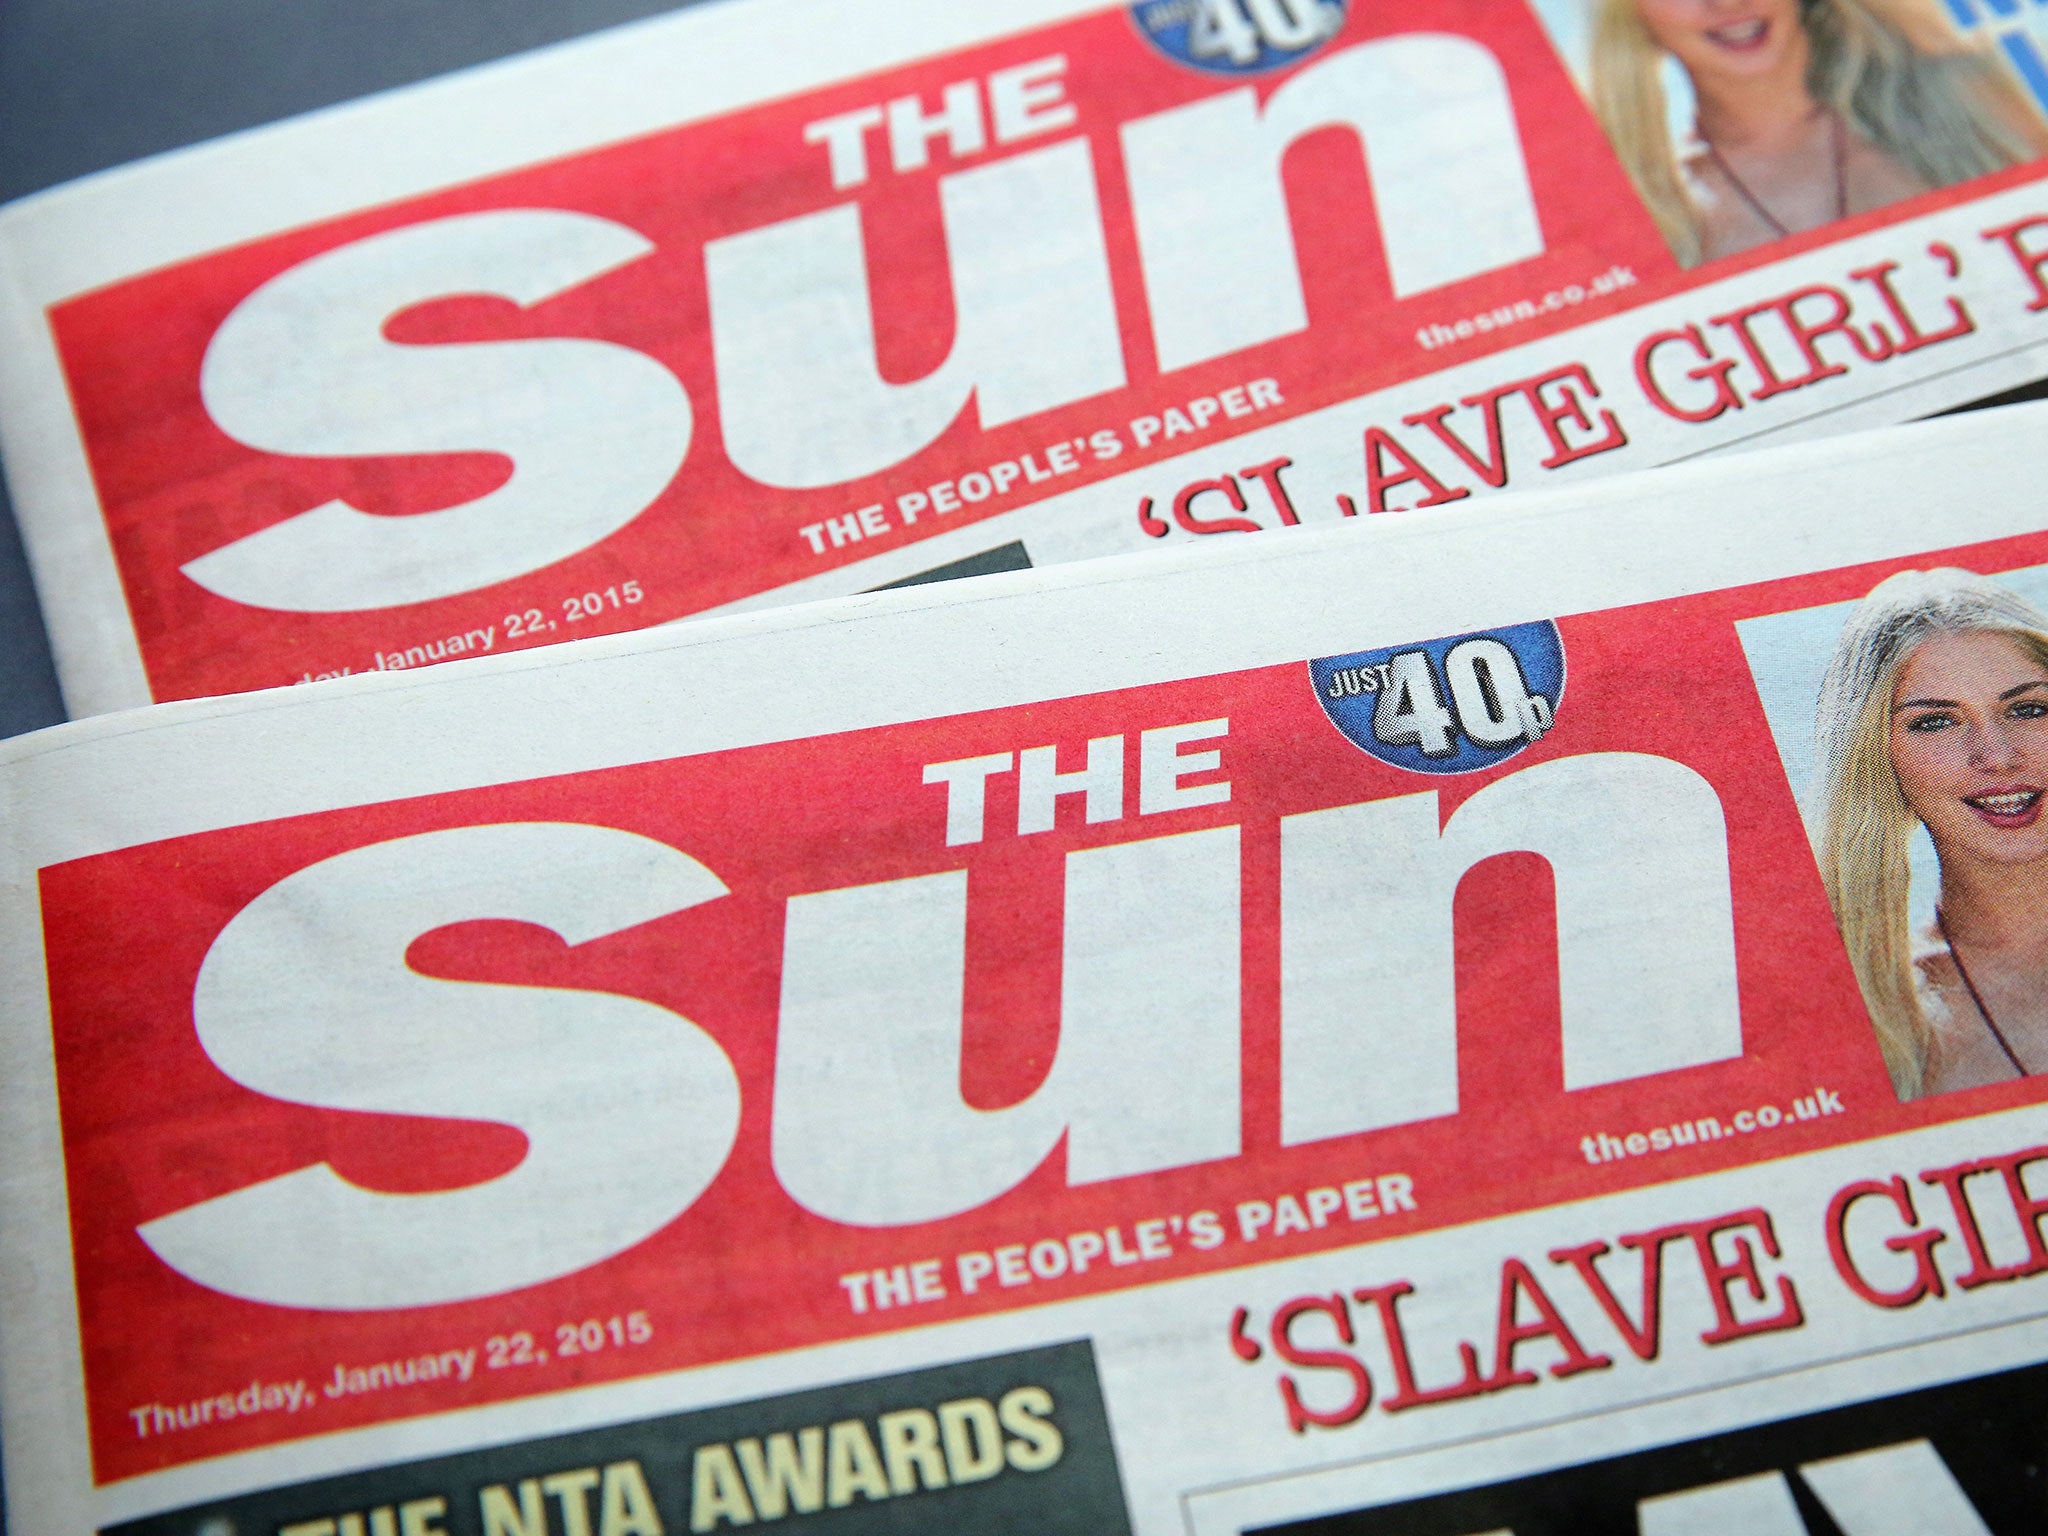 Four Sun journalists have been cleared of paying public officials.